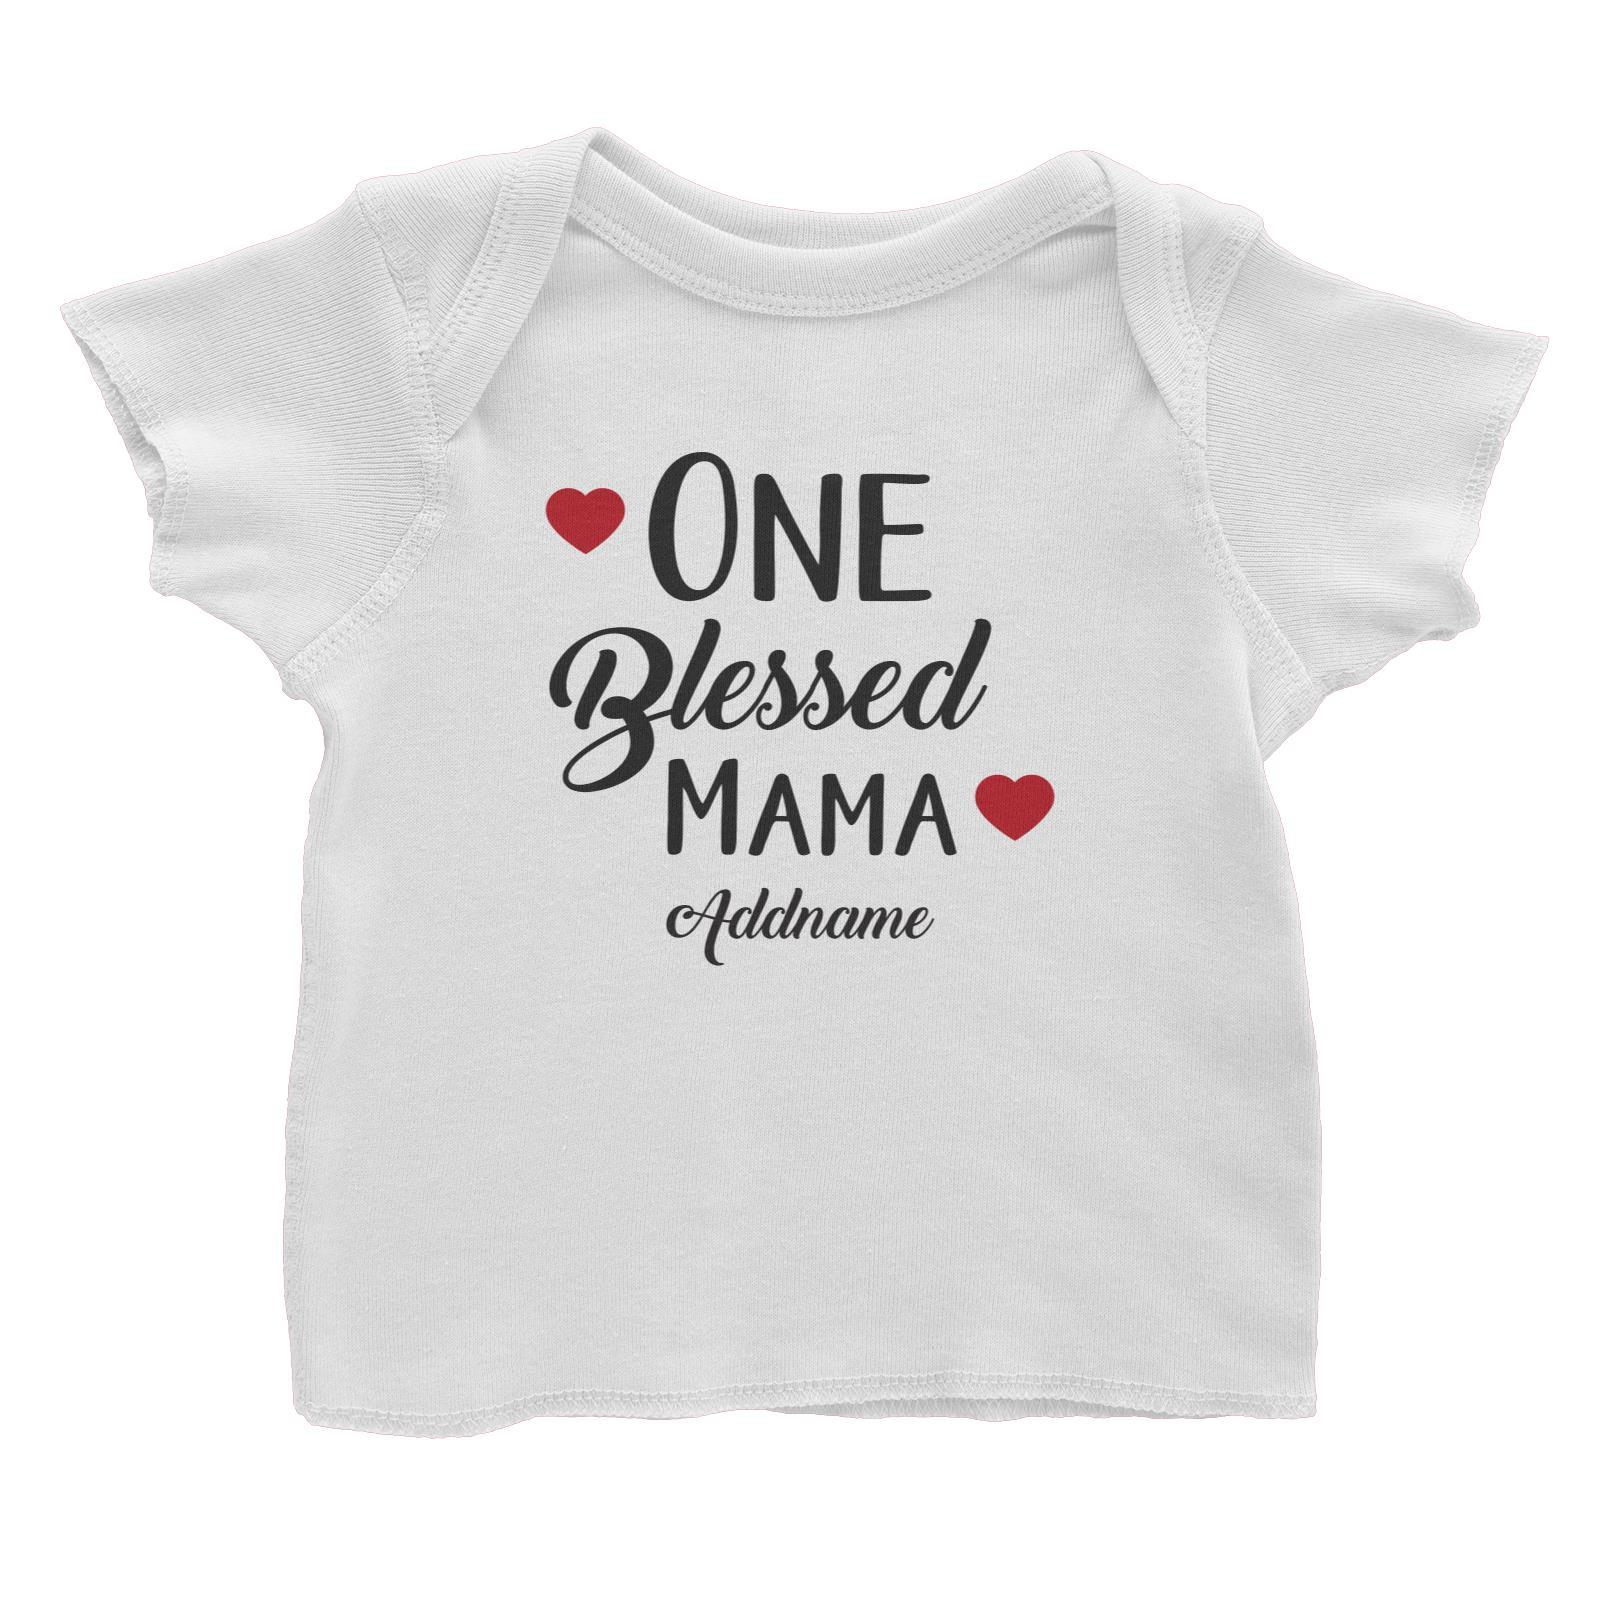 Christian Series One Blessed Mama Addname Baby T-Shirt